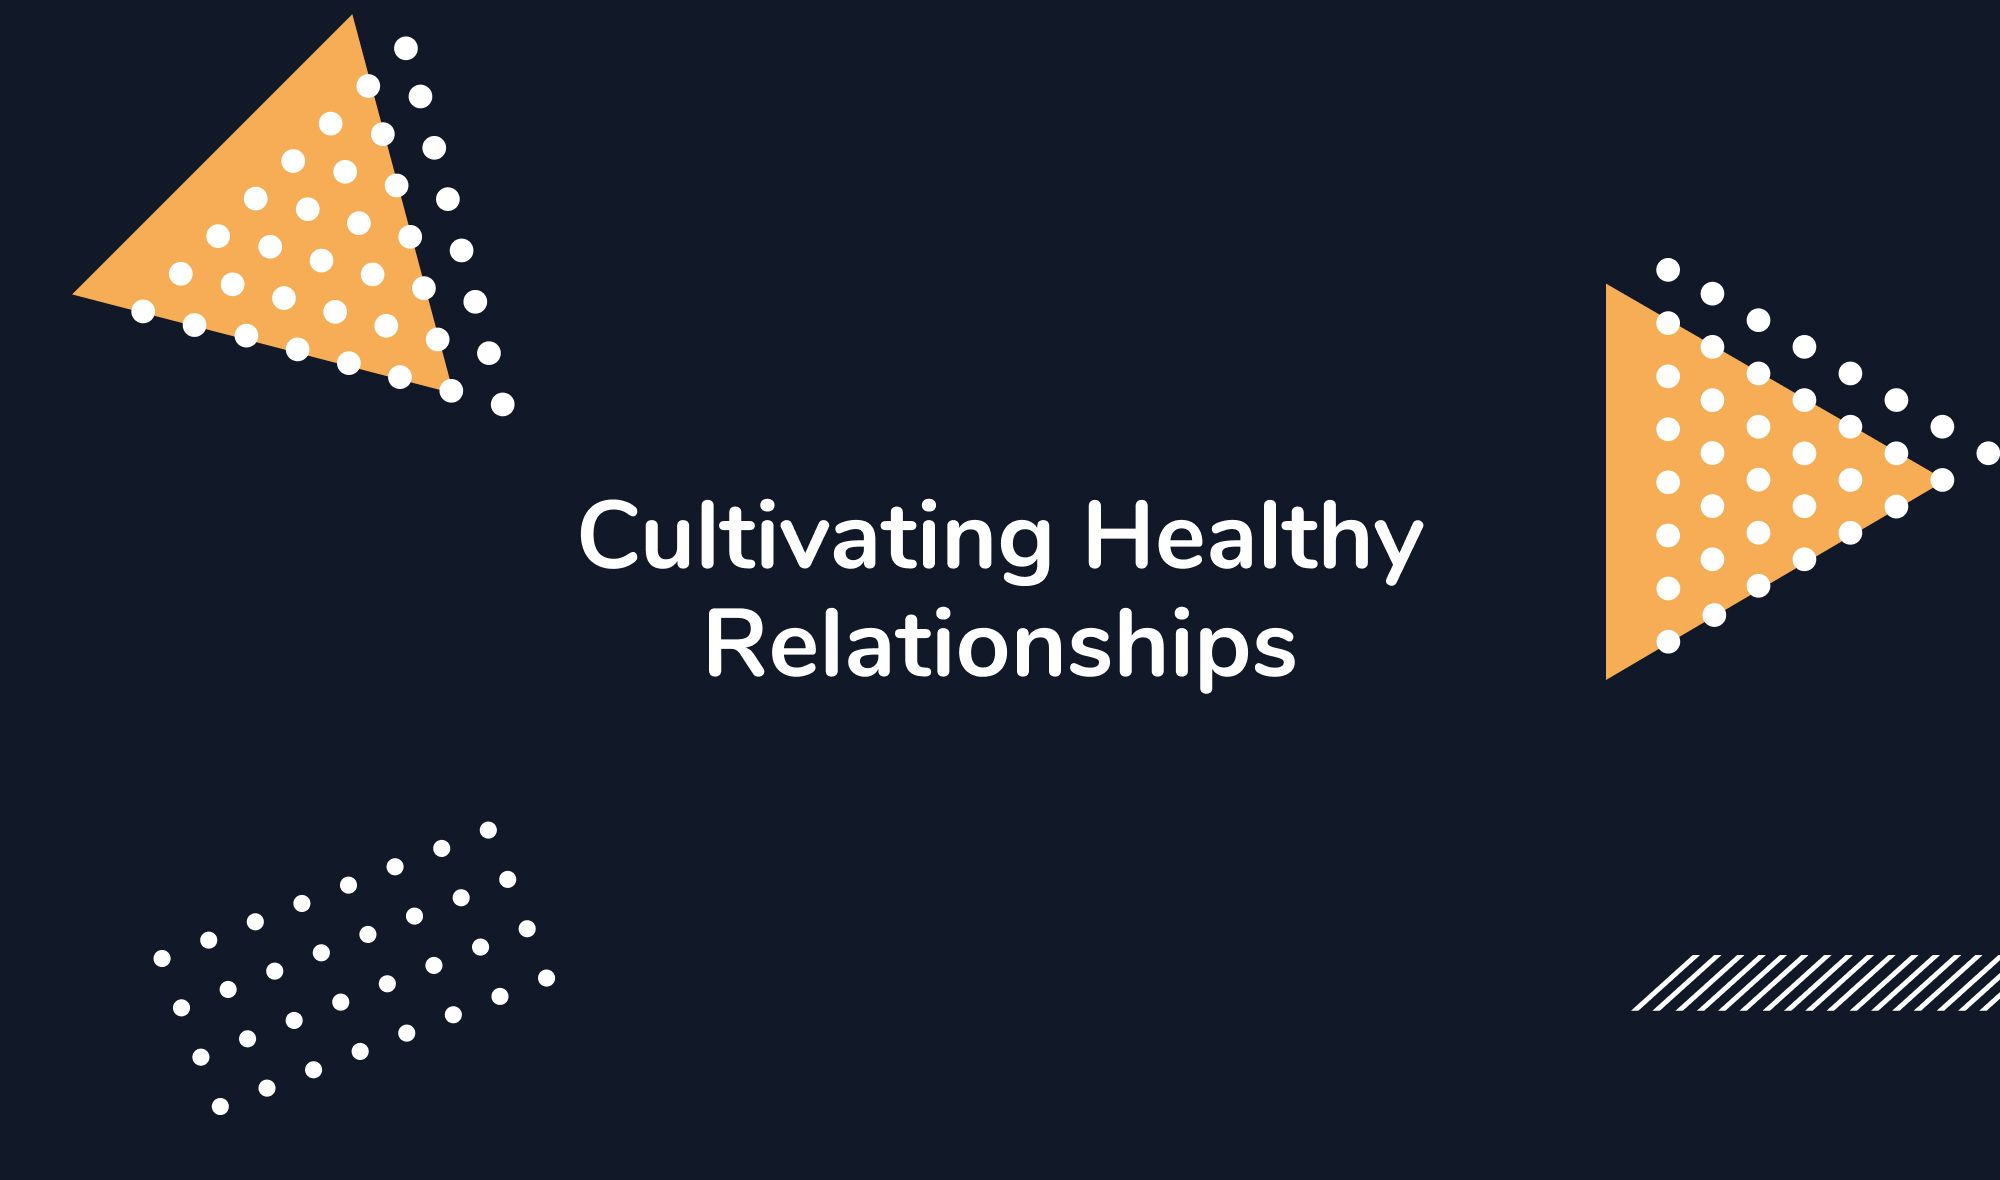 Cultivating Healthy Relationships and Emotional Connections